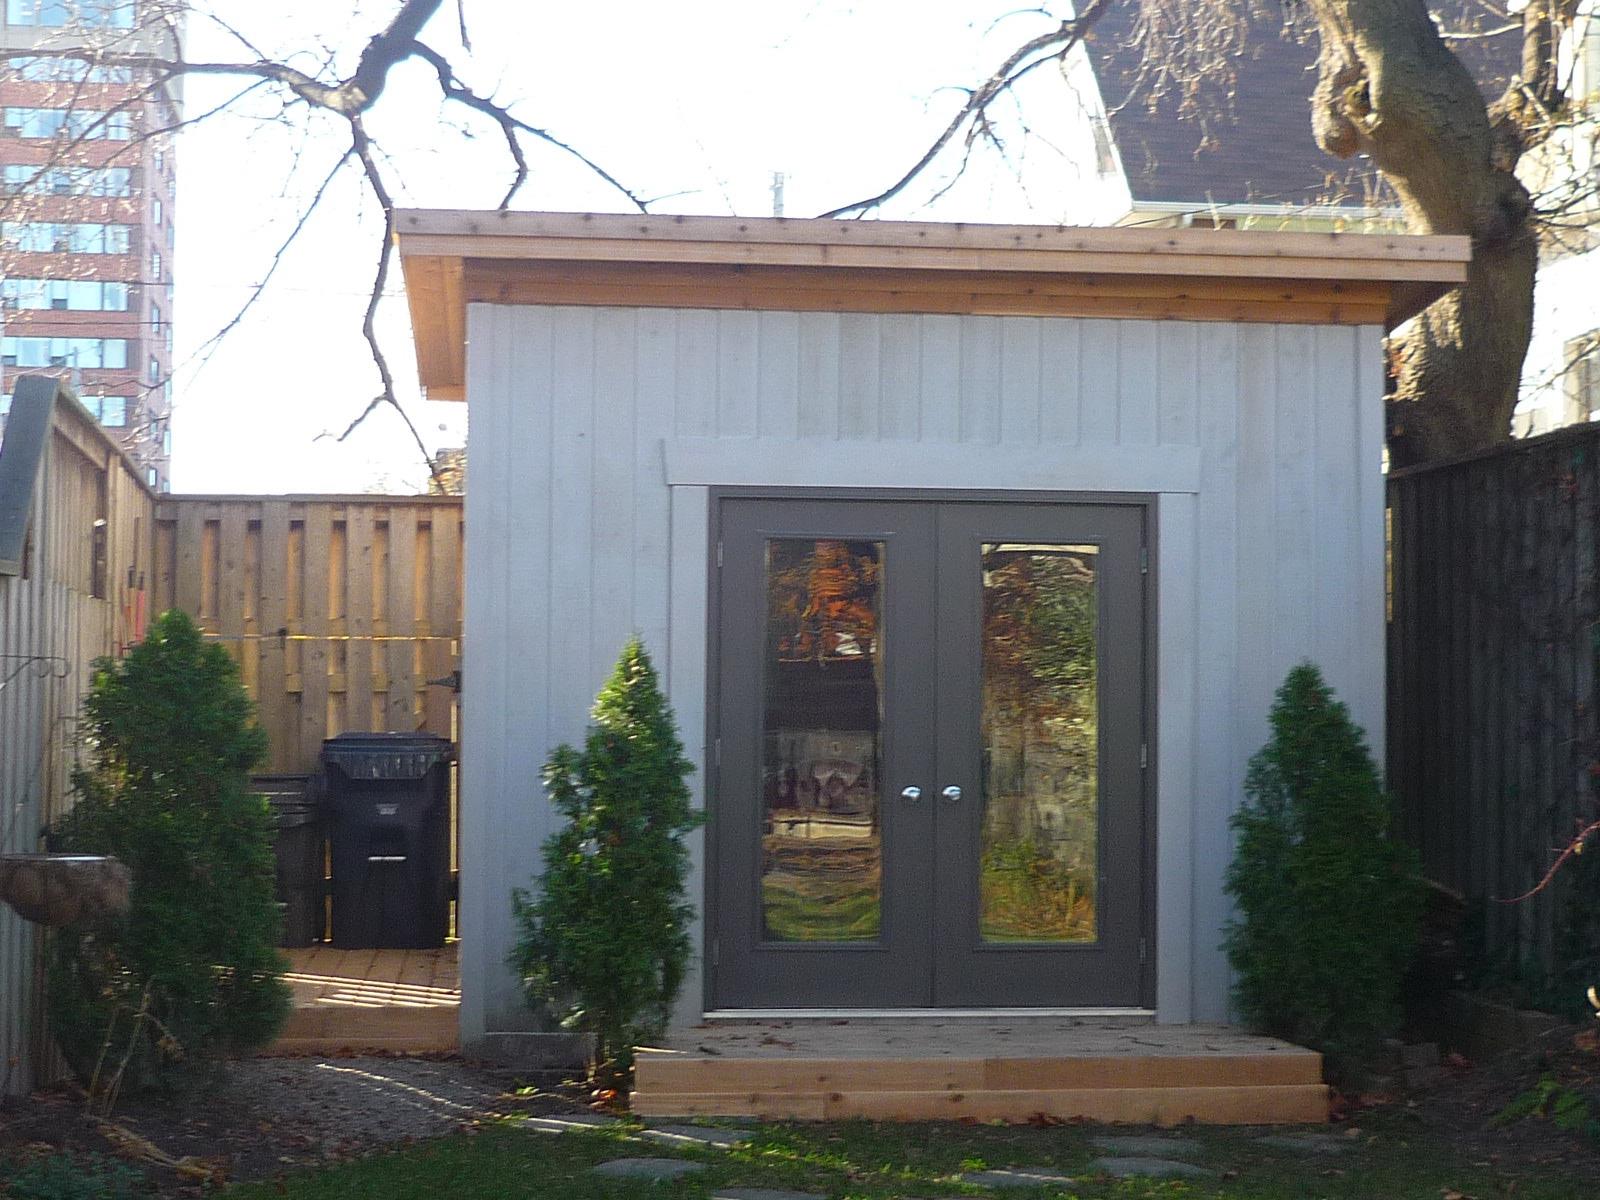 Cedar Urban Studio shed 8x12 with French double doors in Toronto, Ontario. ID number 178864-3